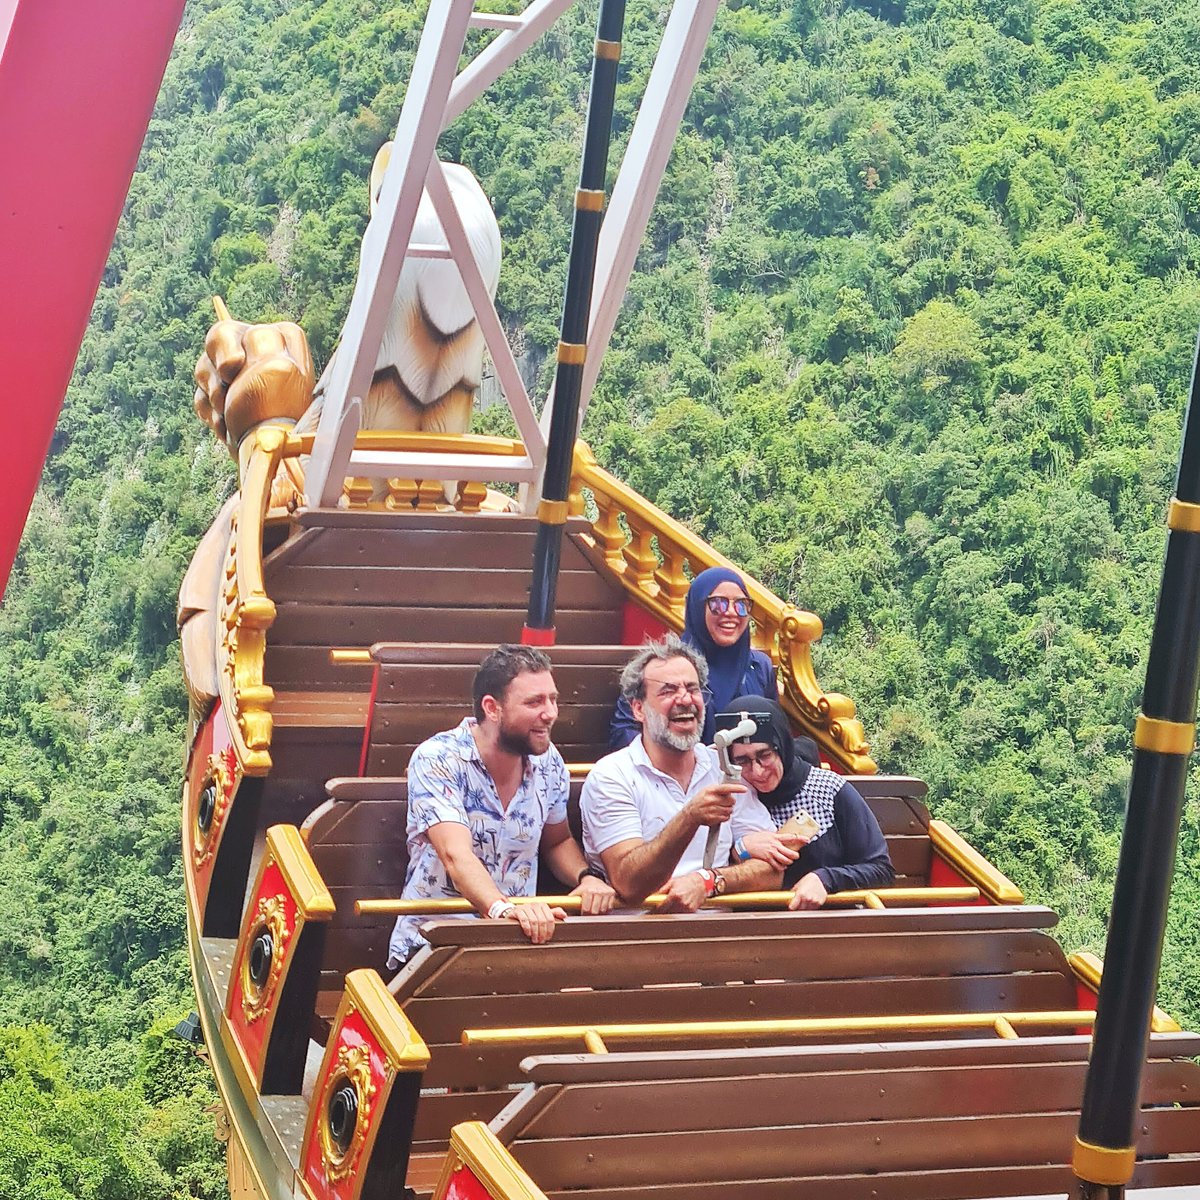 Laughter is one of the greatest medicine, so laugh out loud with your loved ones as you ride on on our Stormrider!⚓
 
#SunwayLostWorldOfTambun
#AwesomeMoments
#STPStudios
#PlayWithConfidence
#StayWithConfidence